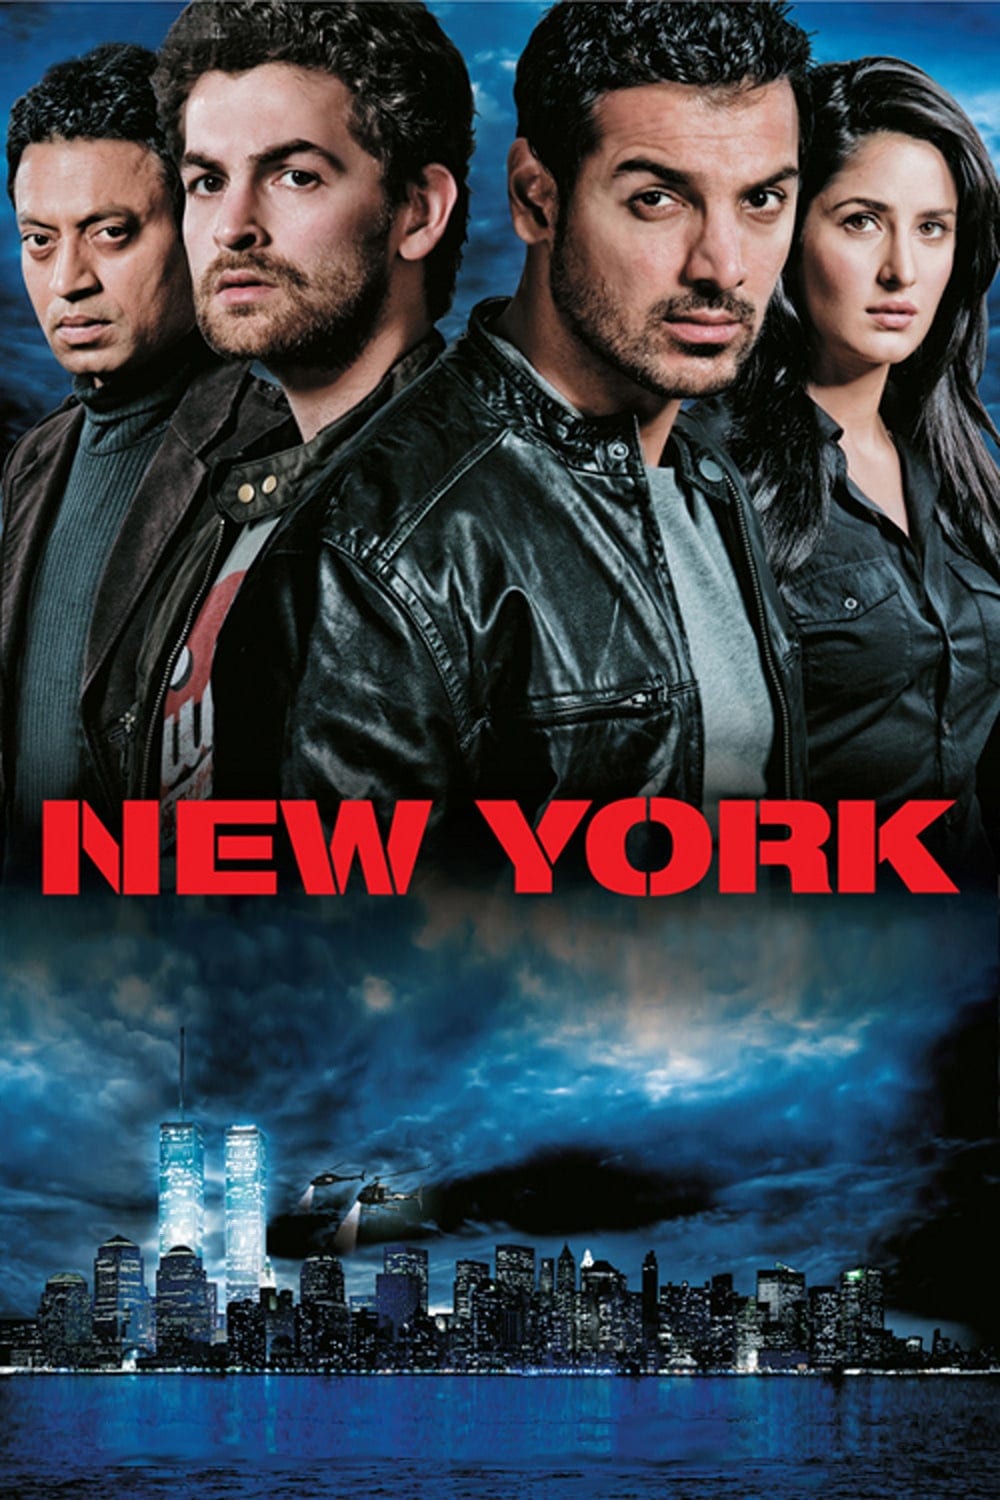 Poster for the movie "New York"